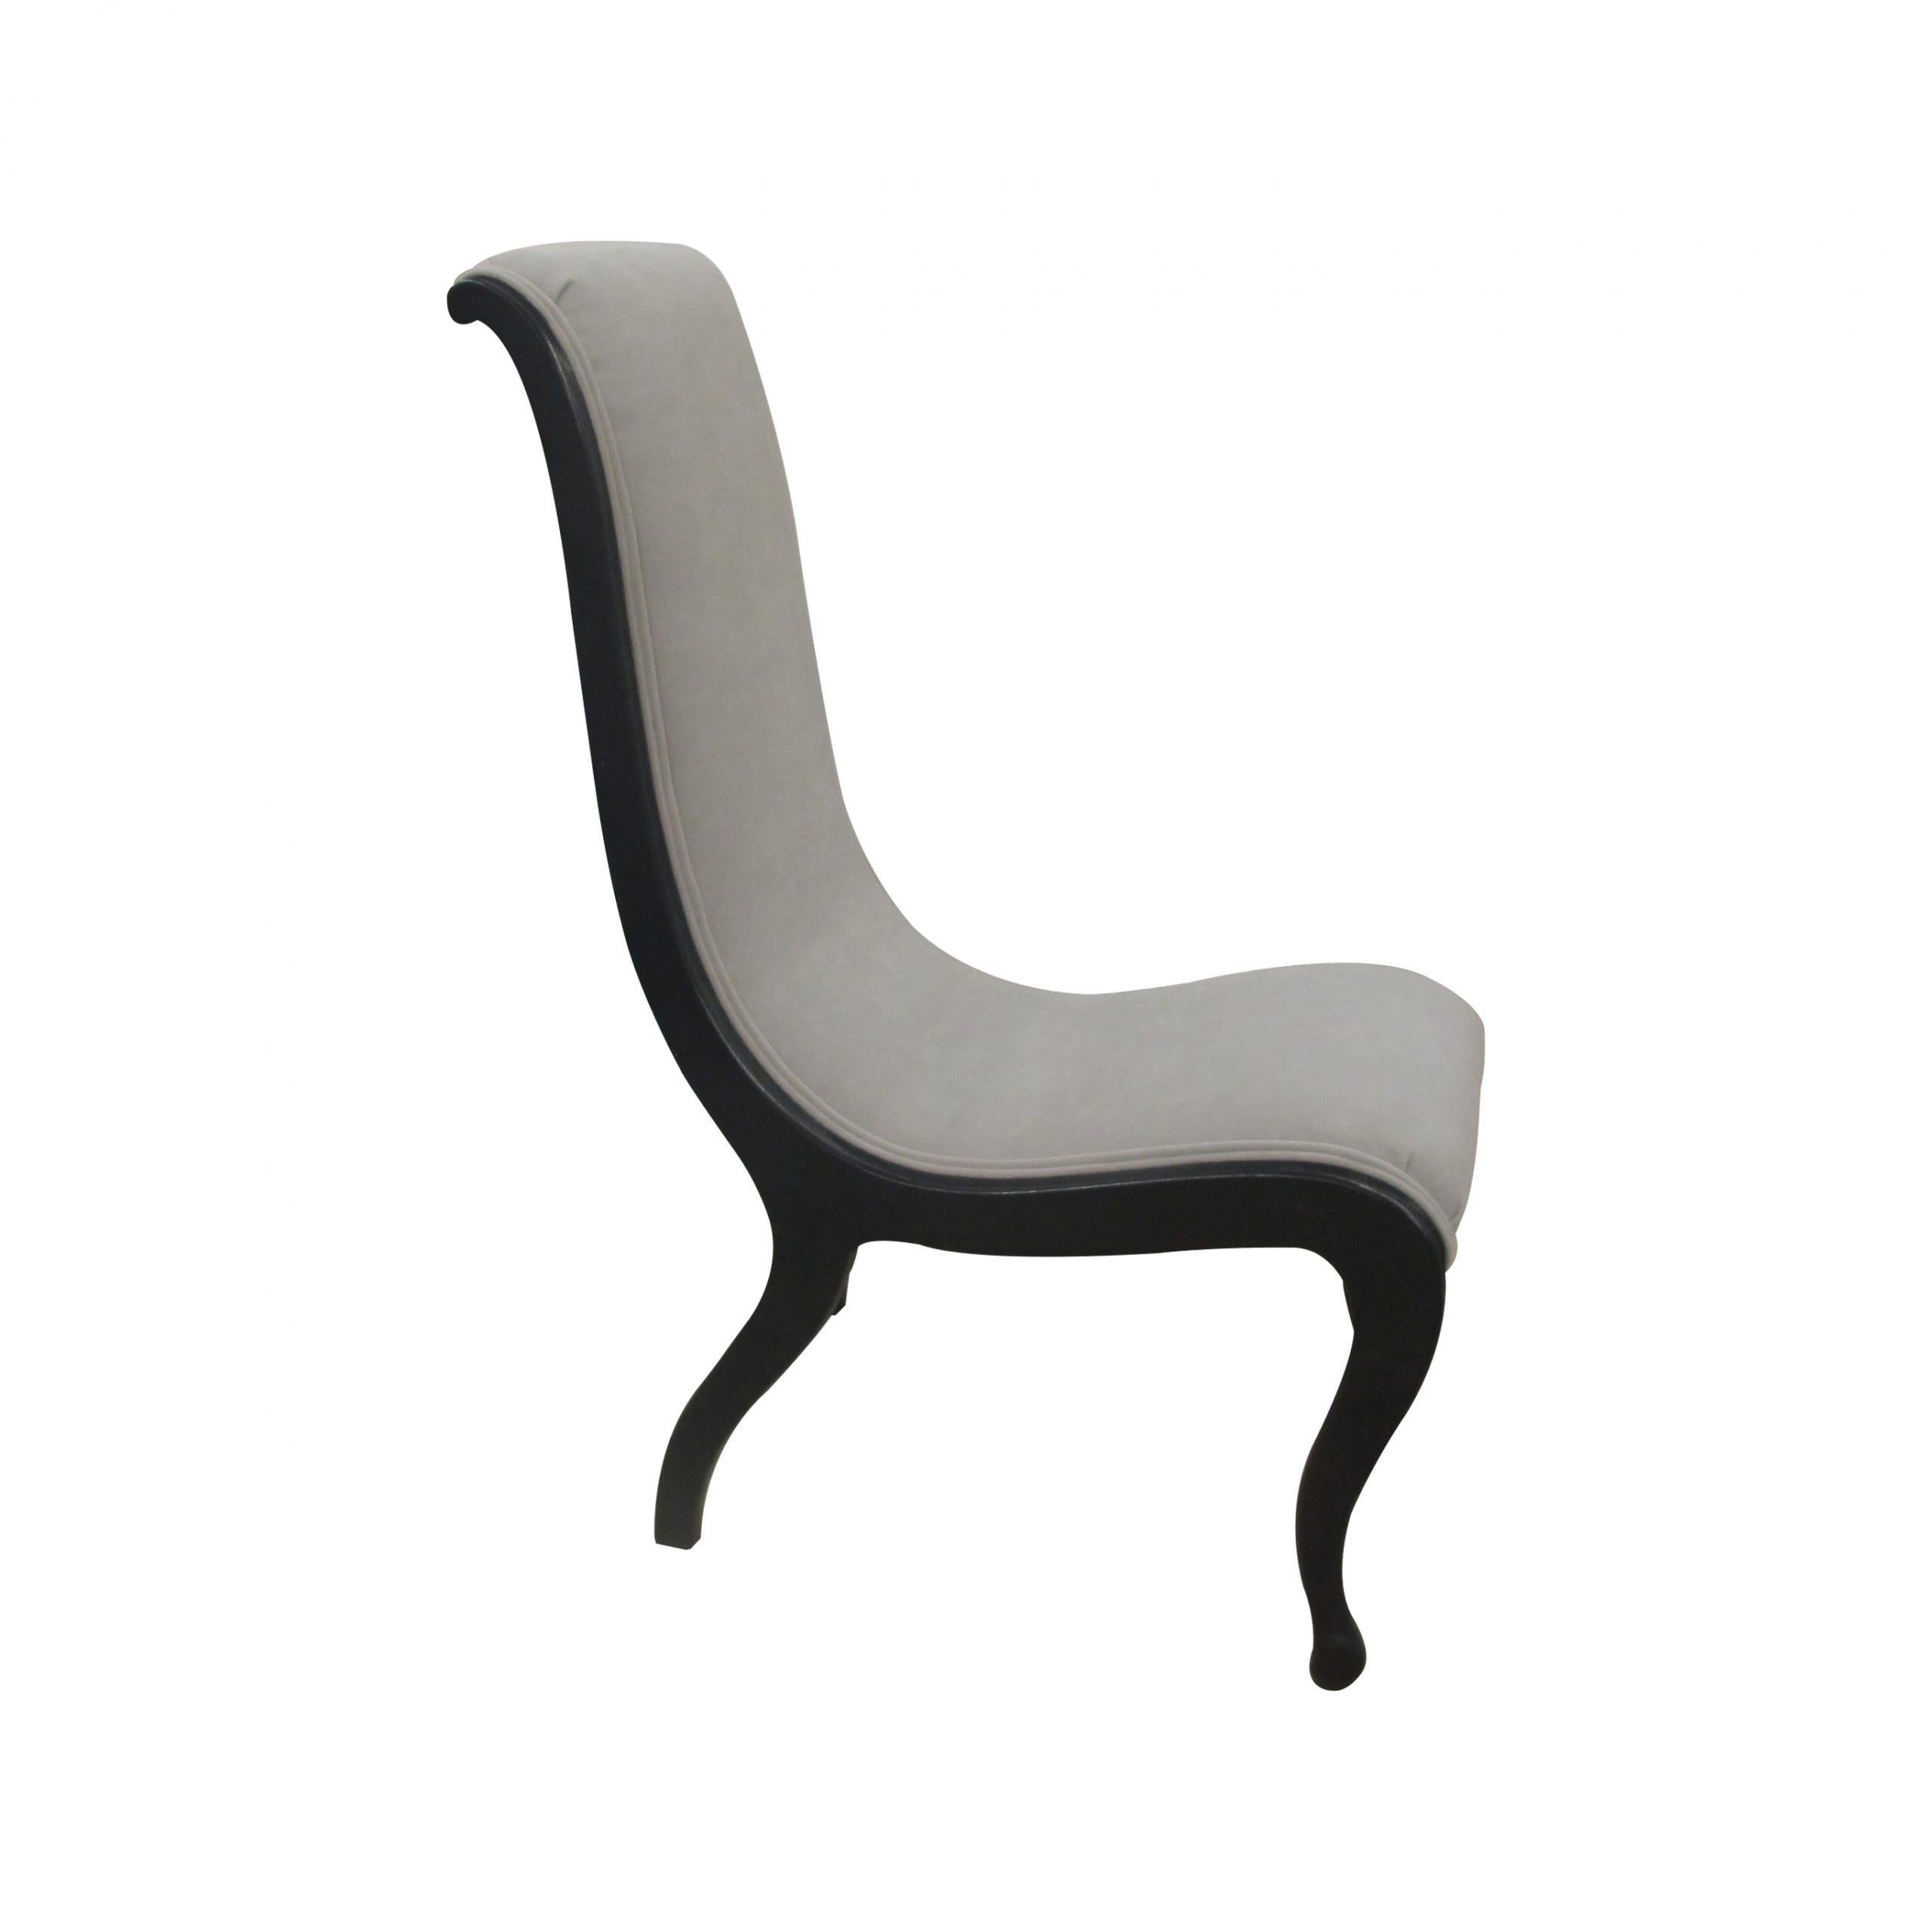 This is a very elegant and versatile swan neck chair with a beautiful black curved frame, Swedish circa 1930s. The chair has been newly upholstered in a suede-like washable fabric. 

Size: H95 cm x W50 cm x D75 cm
